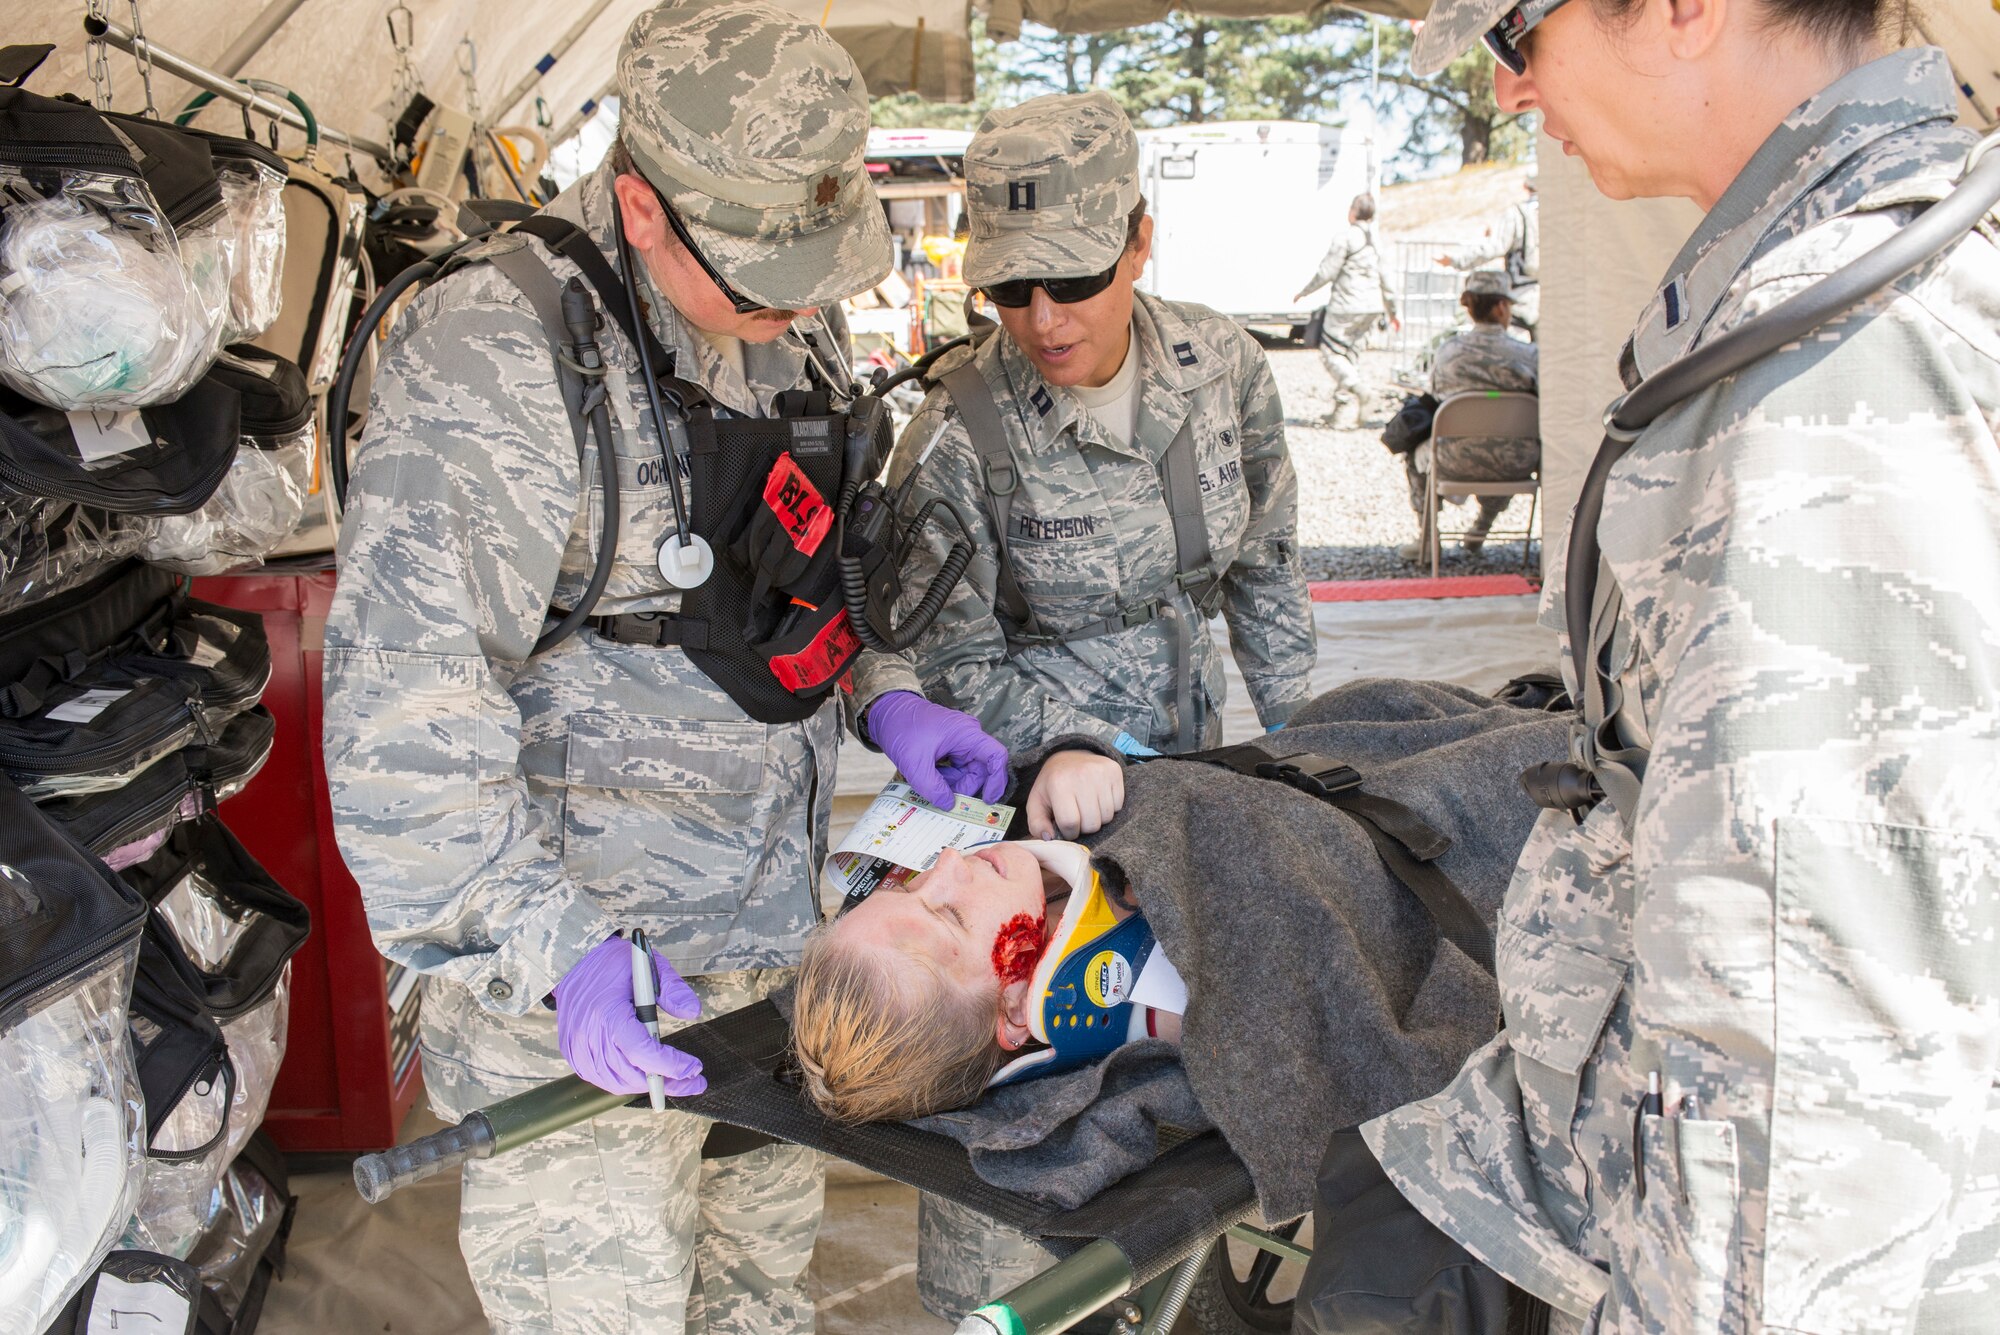 (From the left) Maj. Robert J. Ochsner, basic life support physician, Capt. Alex P. Peterson, nurse practitioner and 2nd Lt. Margaret J. Mazzarello, nurse practitioner, all assigned to the 140th Medical Group, Buckley Air Force Base, Colo. examine a patient in triage for internal and external wounds during the joint exercise evaluation (EXEVAL), held at Camp Rilea, Warrenton, Oregon, on Aug. 4, 2016. The EXEVAL ran for five days in a crawl, walk, run sequence, where they started off slowly, then transitioned into rapid response on evaluation day. (U.S. Air National Guard photo by Staff Sgt. Bobbie Reynolds) 